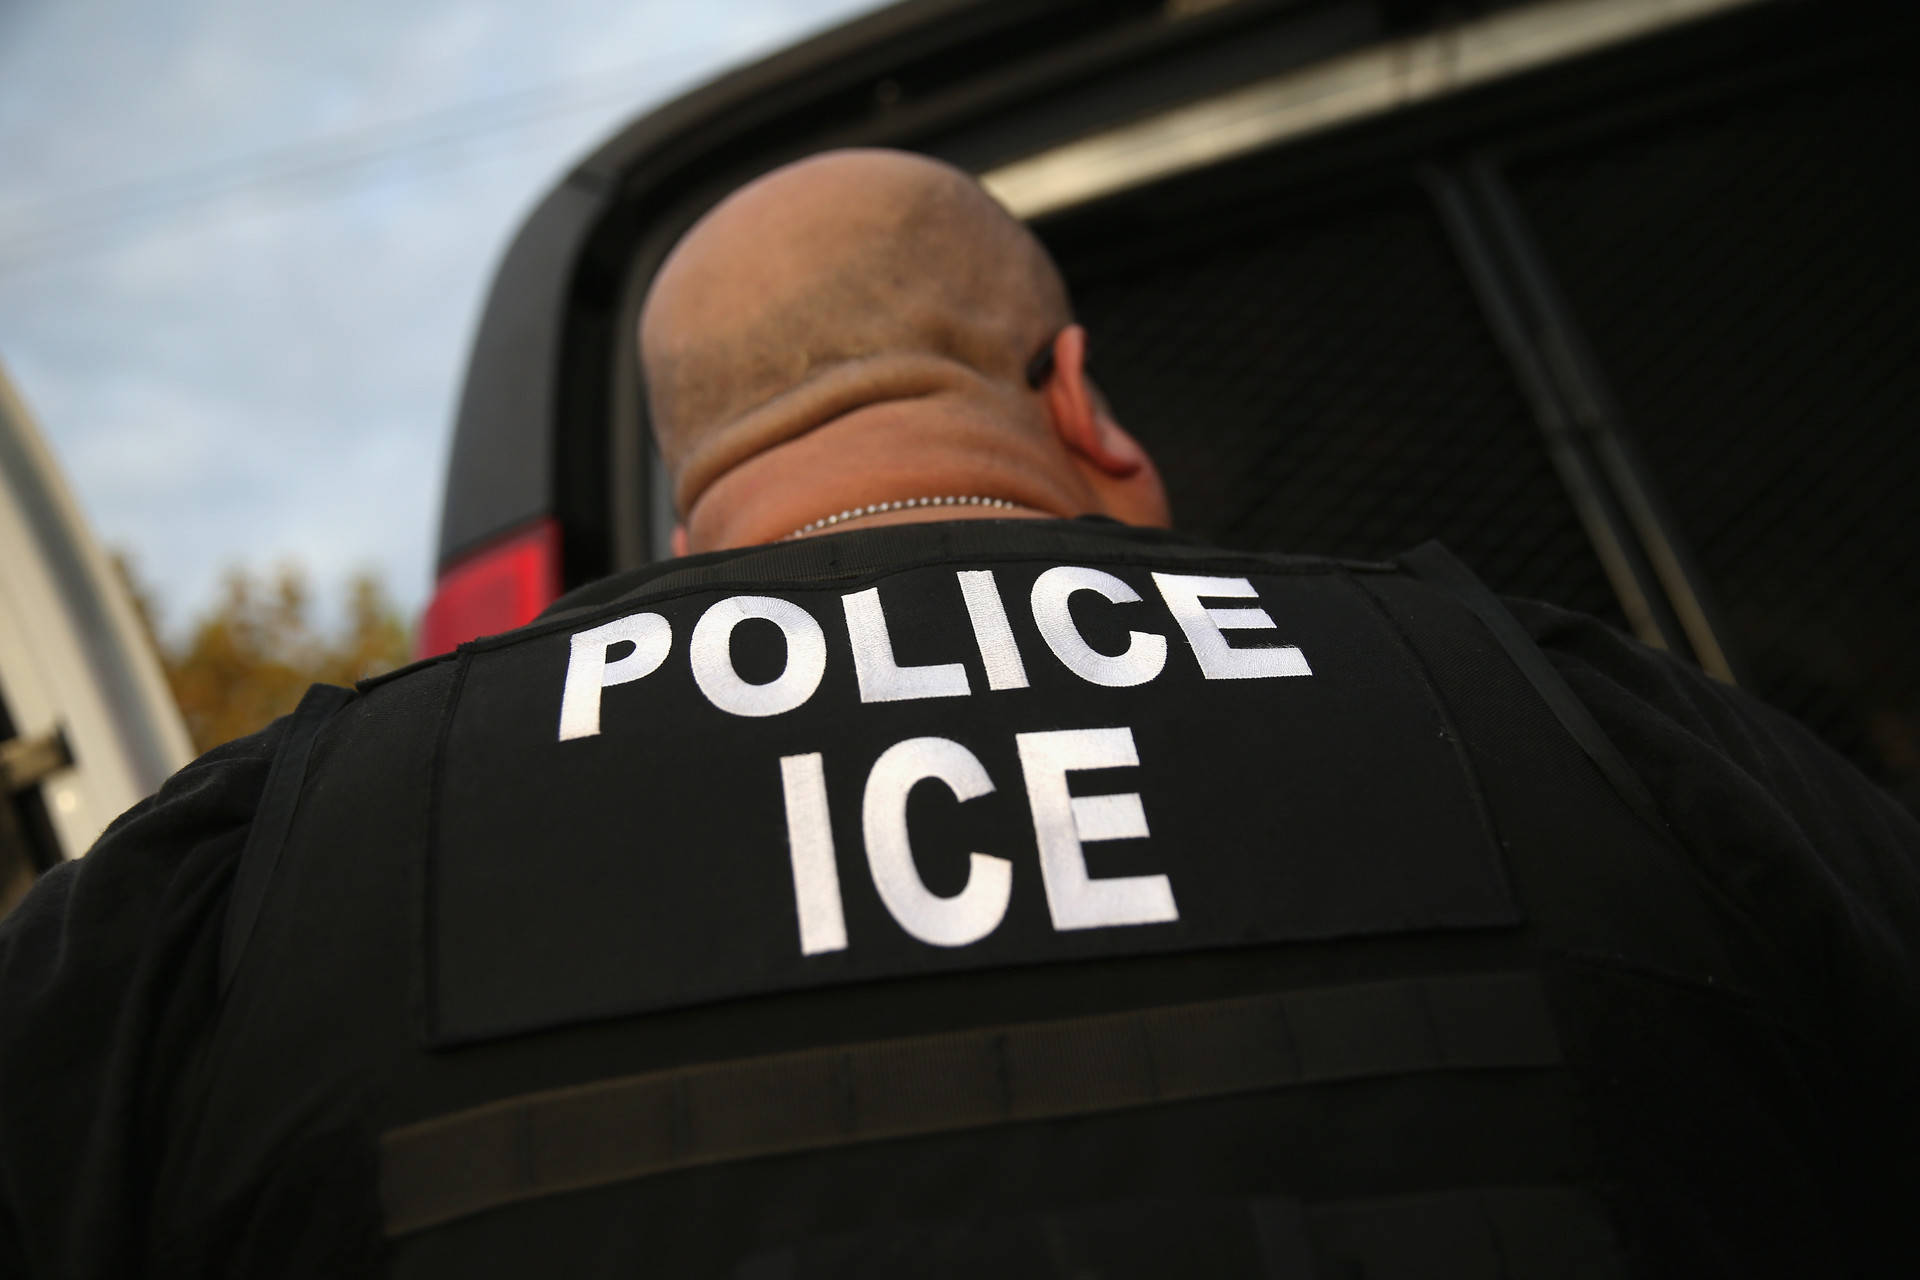 U.S. Immigration and Customs Enforcement officials say they detained the man due to an outstanding arrest warrant in a homicide case in Mexico. John Moore/Getty Images